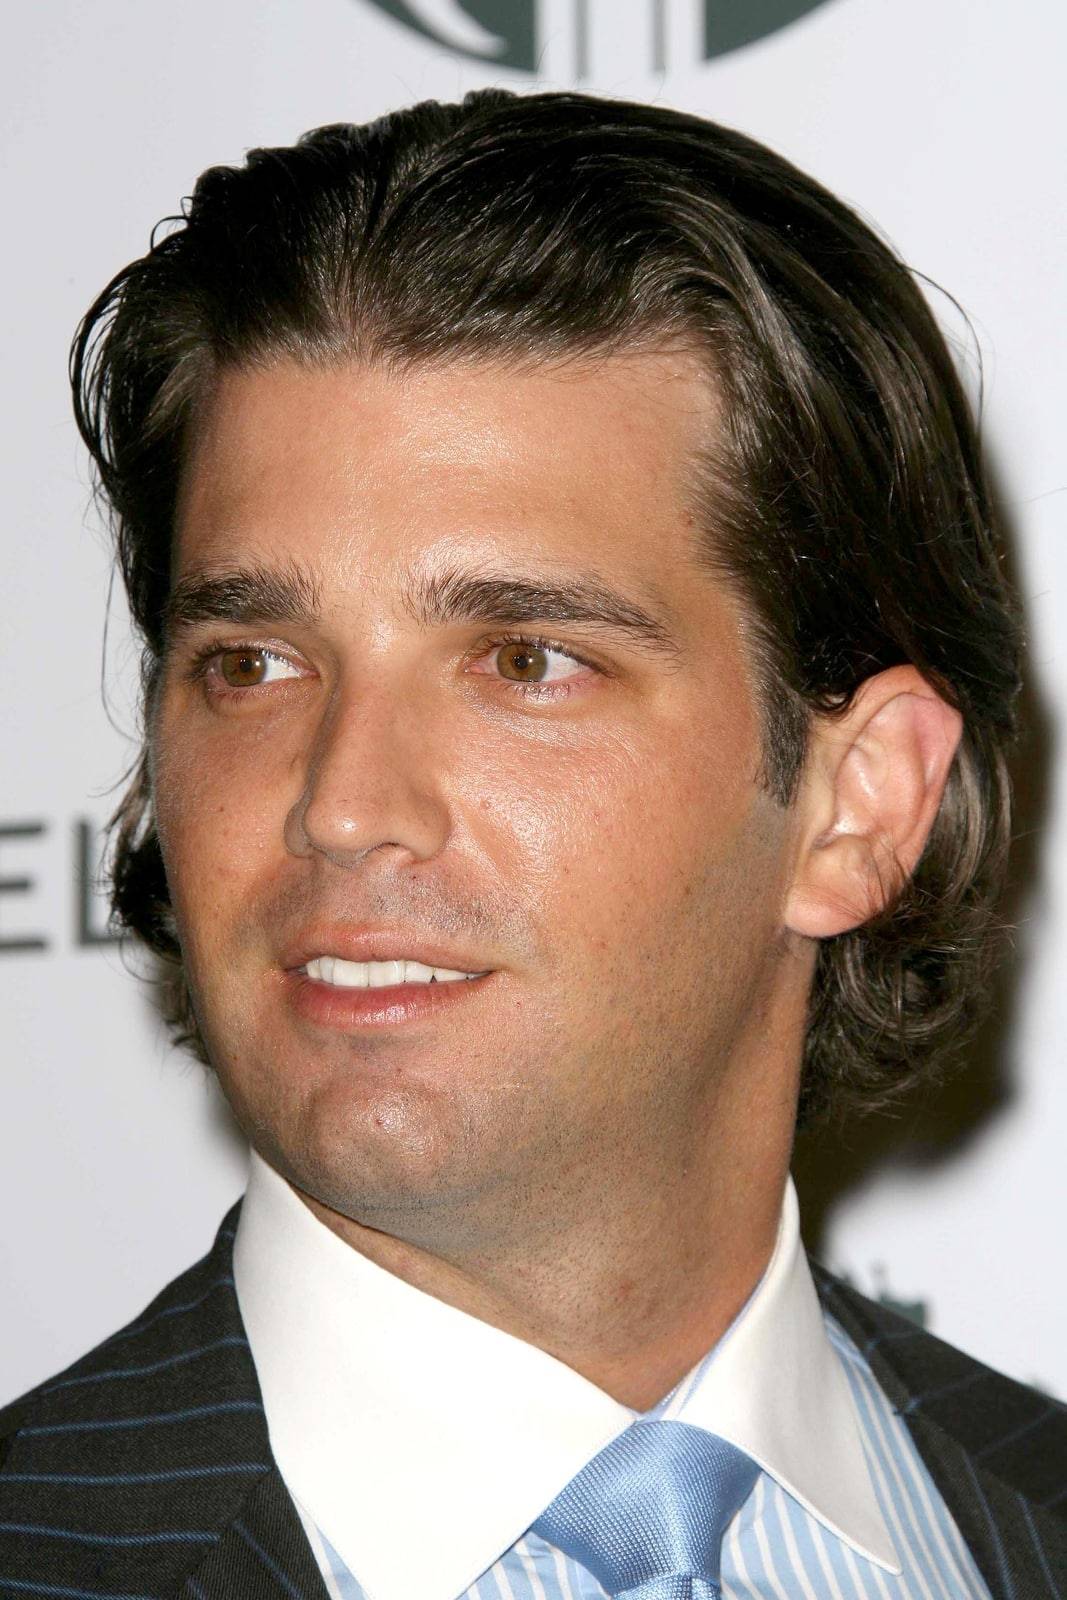 Who is Donald Trump Jr Dating Now?